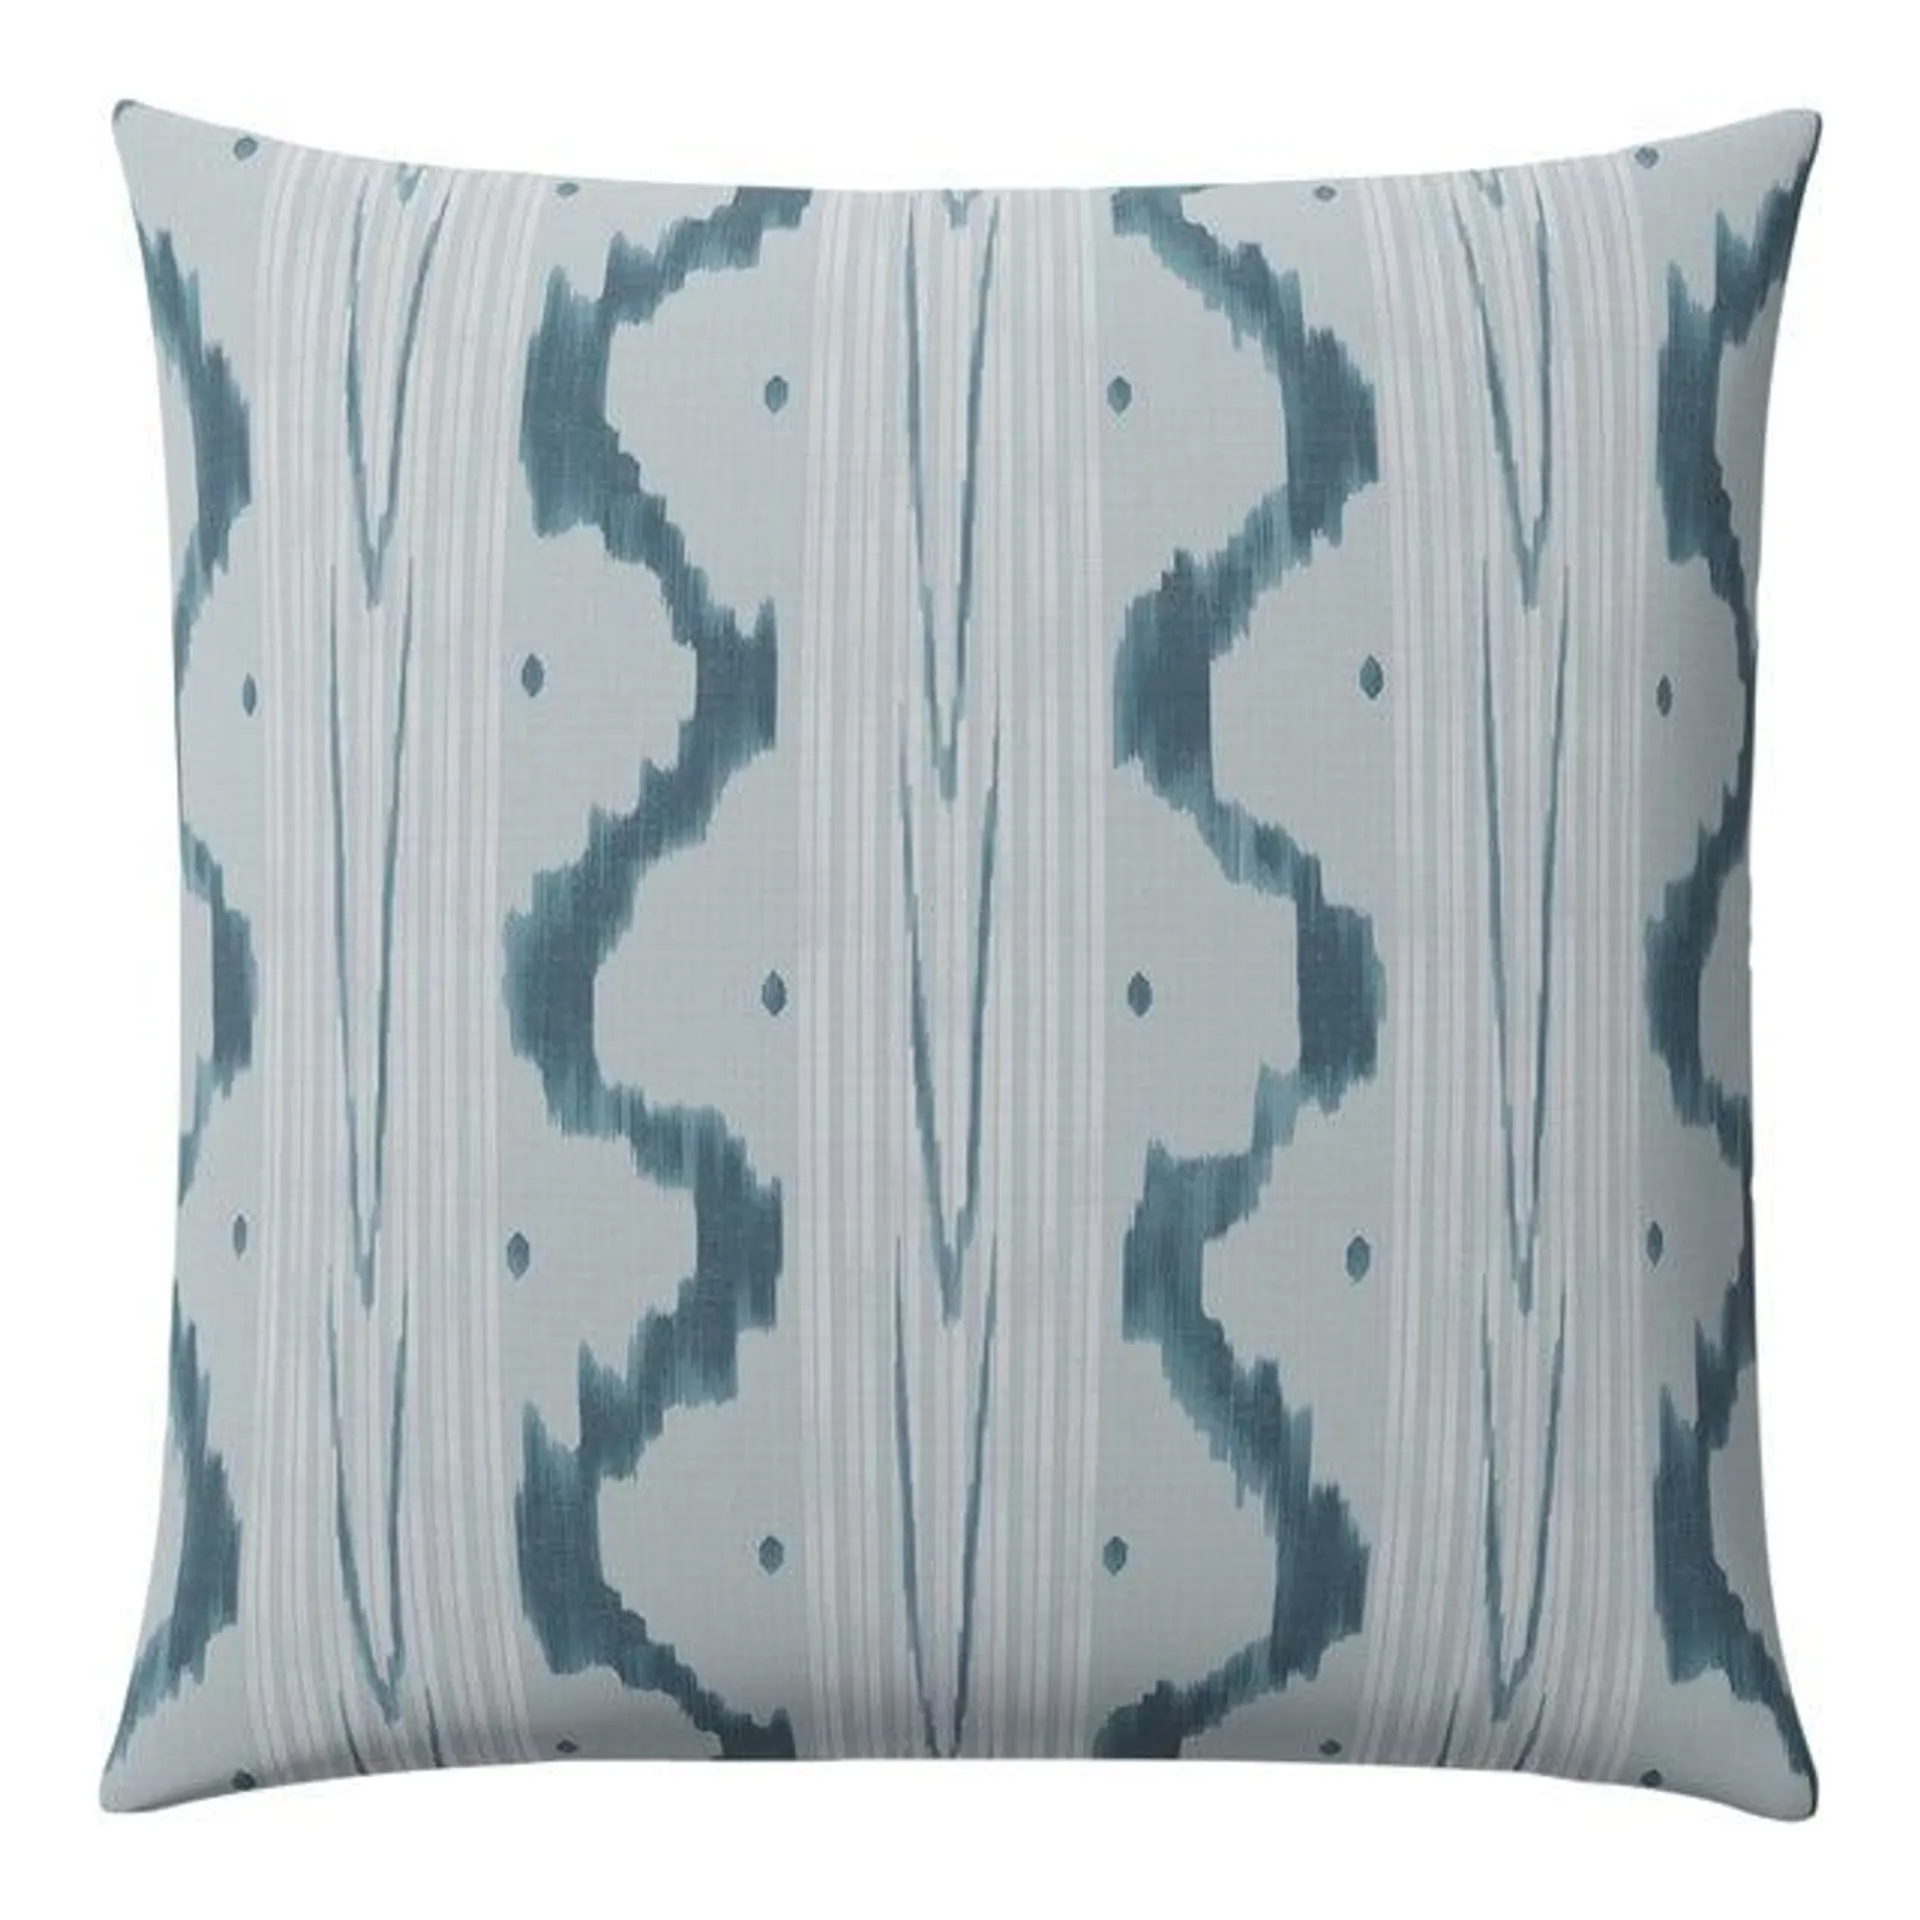 Contemporary Indoor/Outdoor Pillow in Teal Ikat Waves by Lemieux Et Cie, 18x18